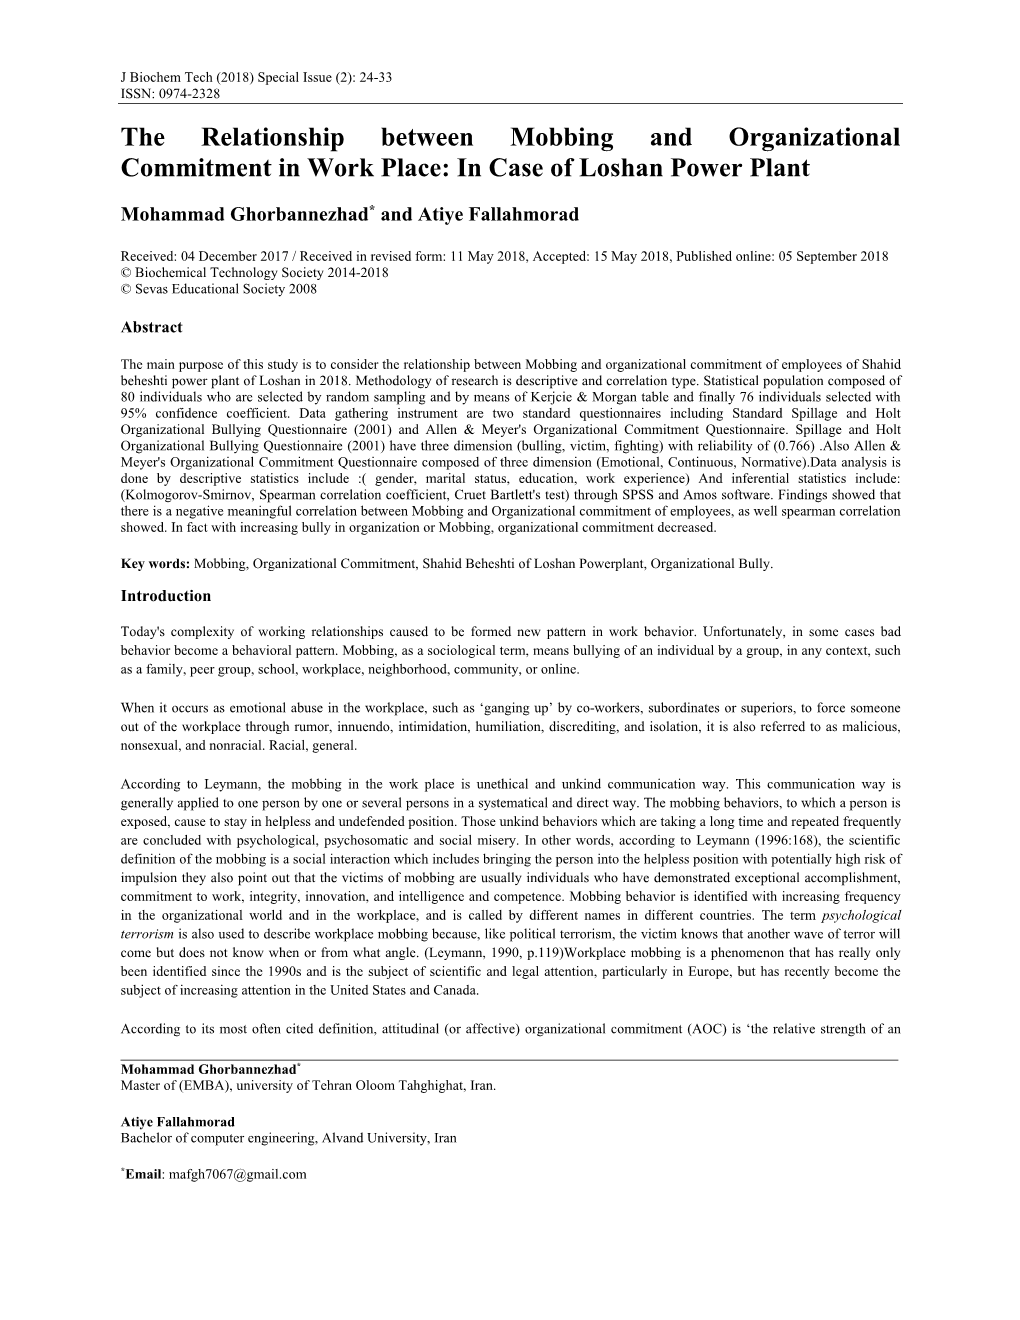 The Relationship Between Mobbing and Organizational Commitment in Work Place: in Case of Loshan Power Plant